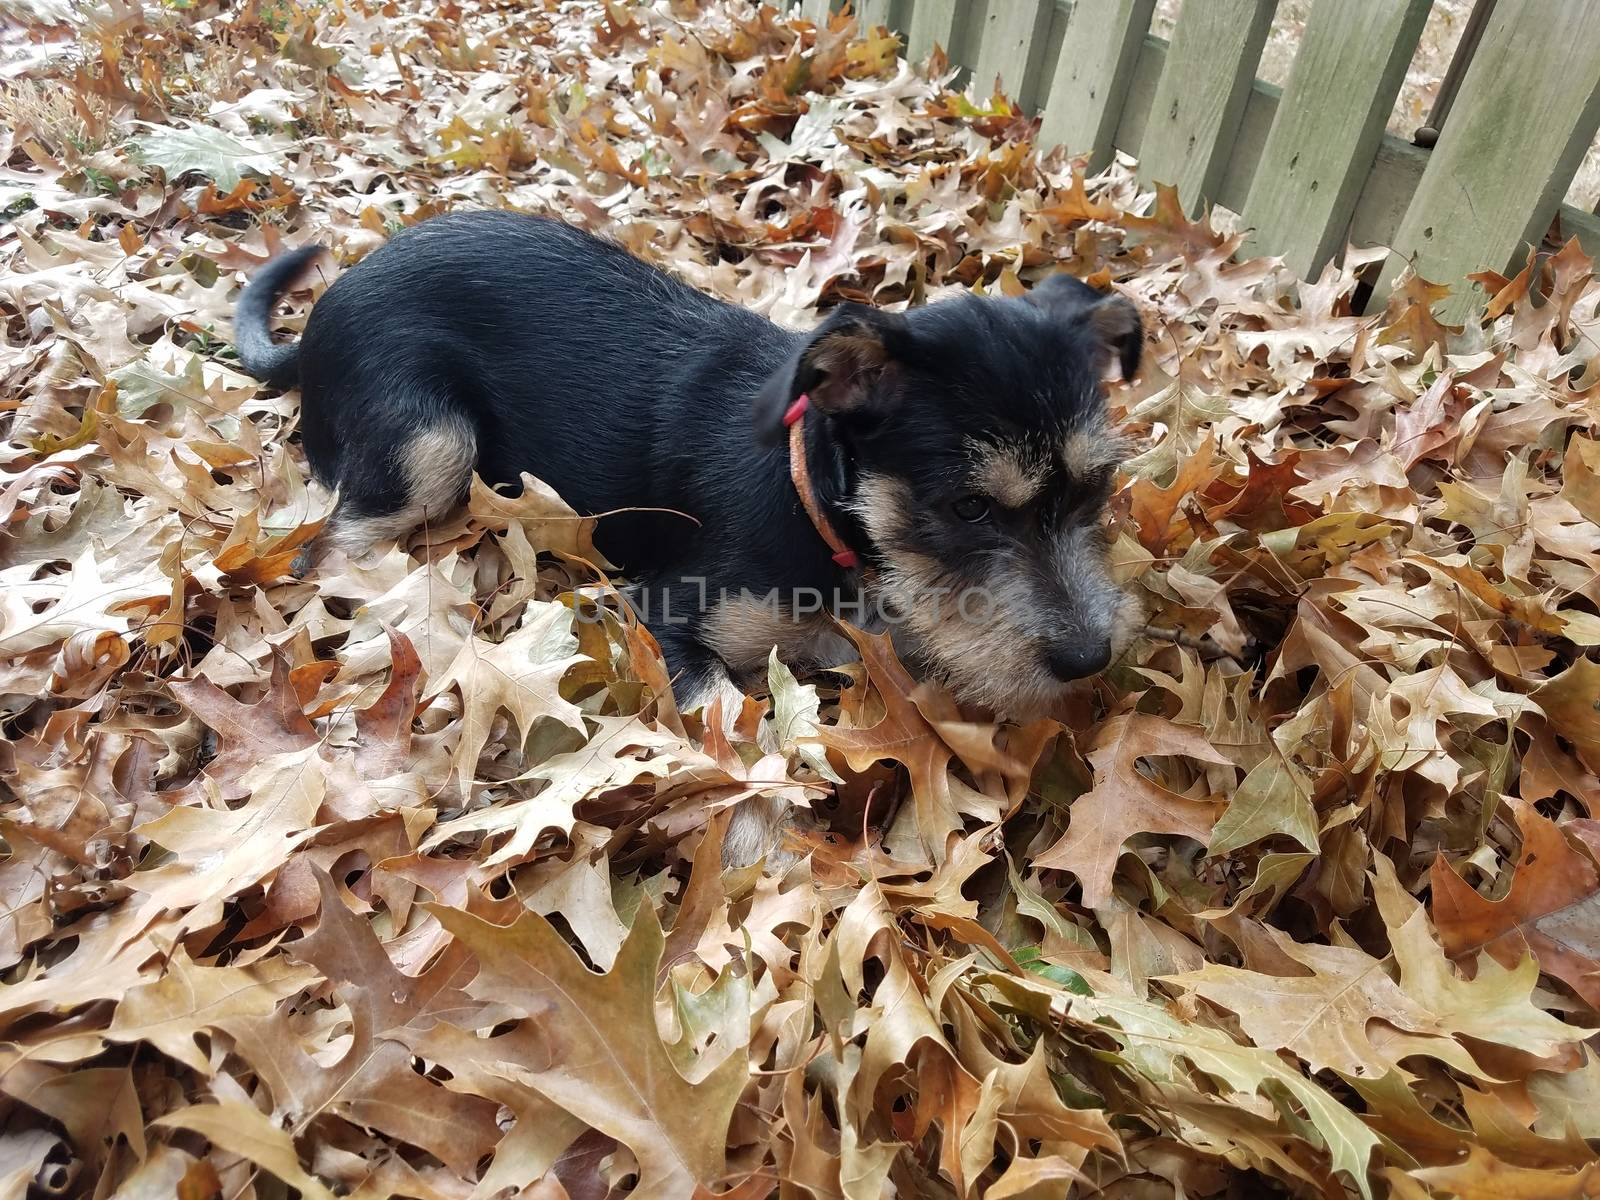 black and white puppy dog playing in fallen brown leaves